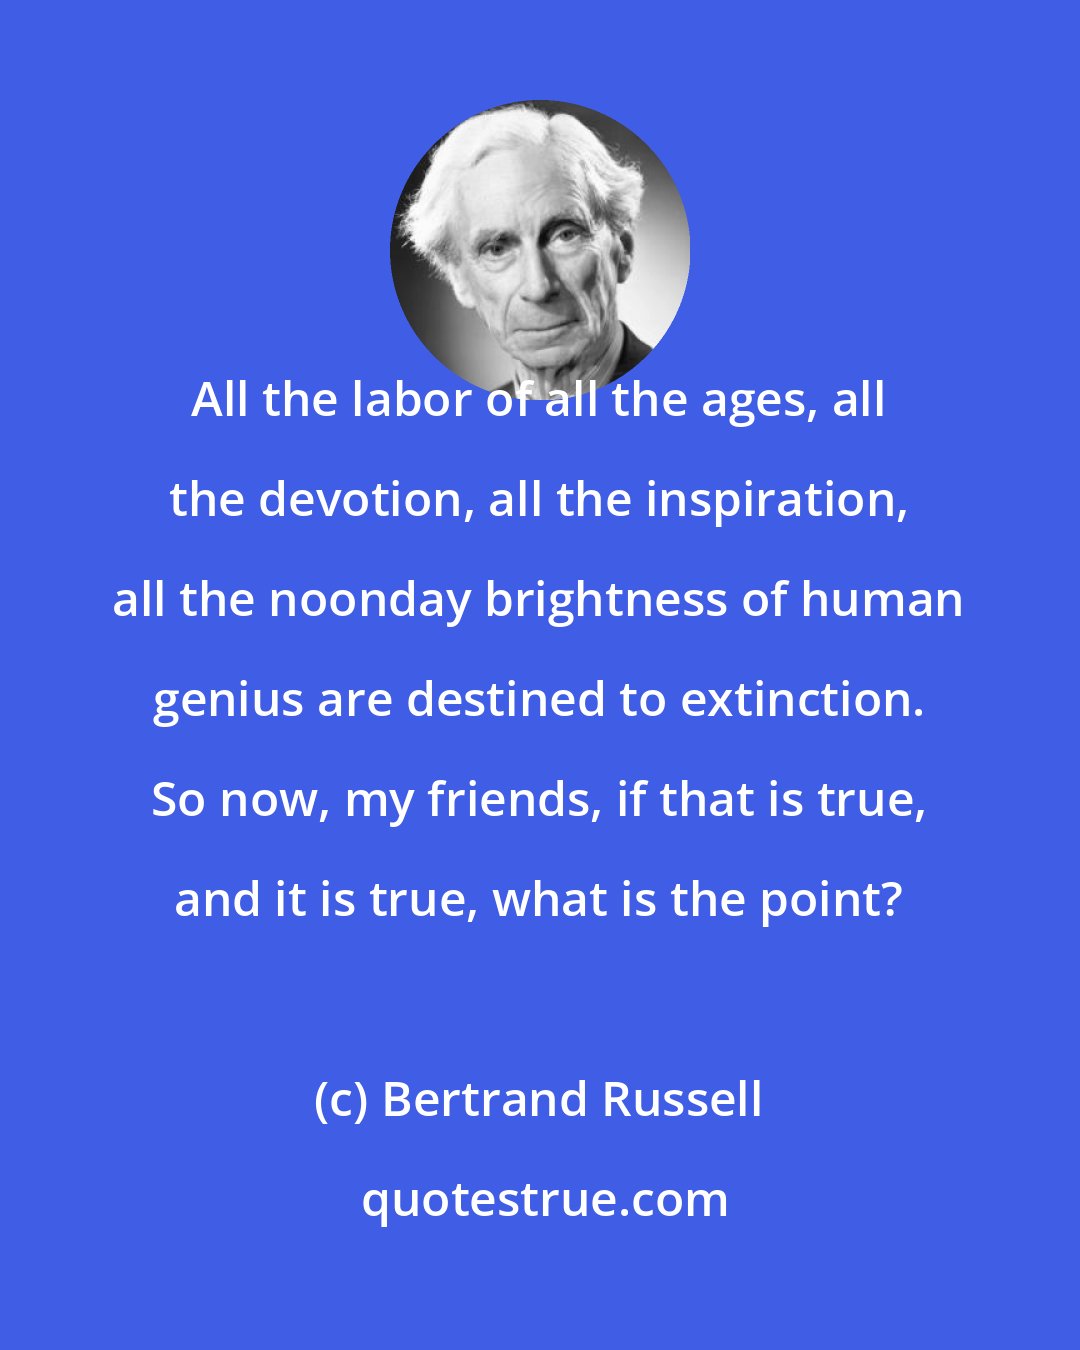 Bertrand Russell: All the labor of all the ages, all the devotion, all the inspiration, all the noonday brightness of human genius are destined to extinction. So now, my friends, if that is true, and it is true, what is the point?